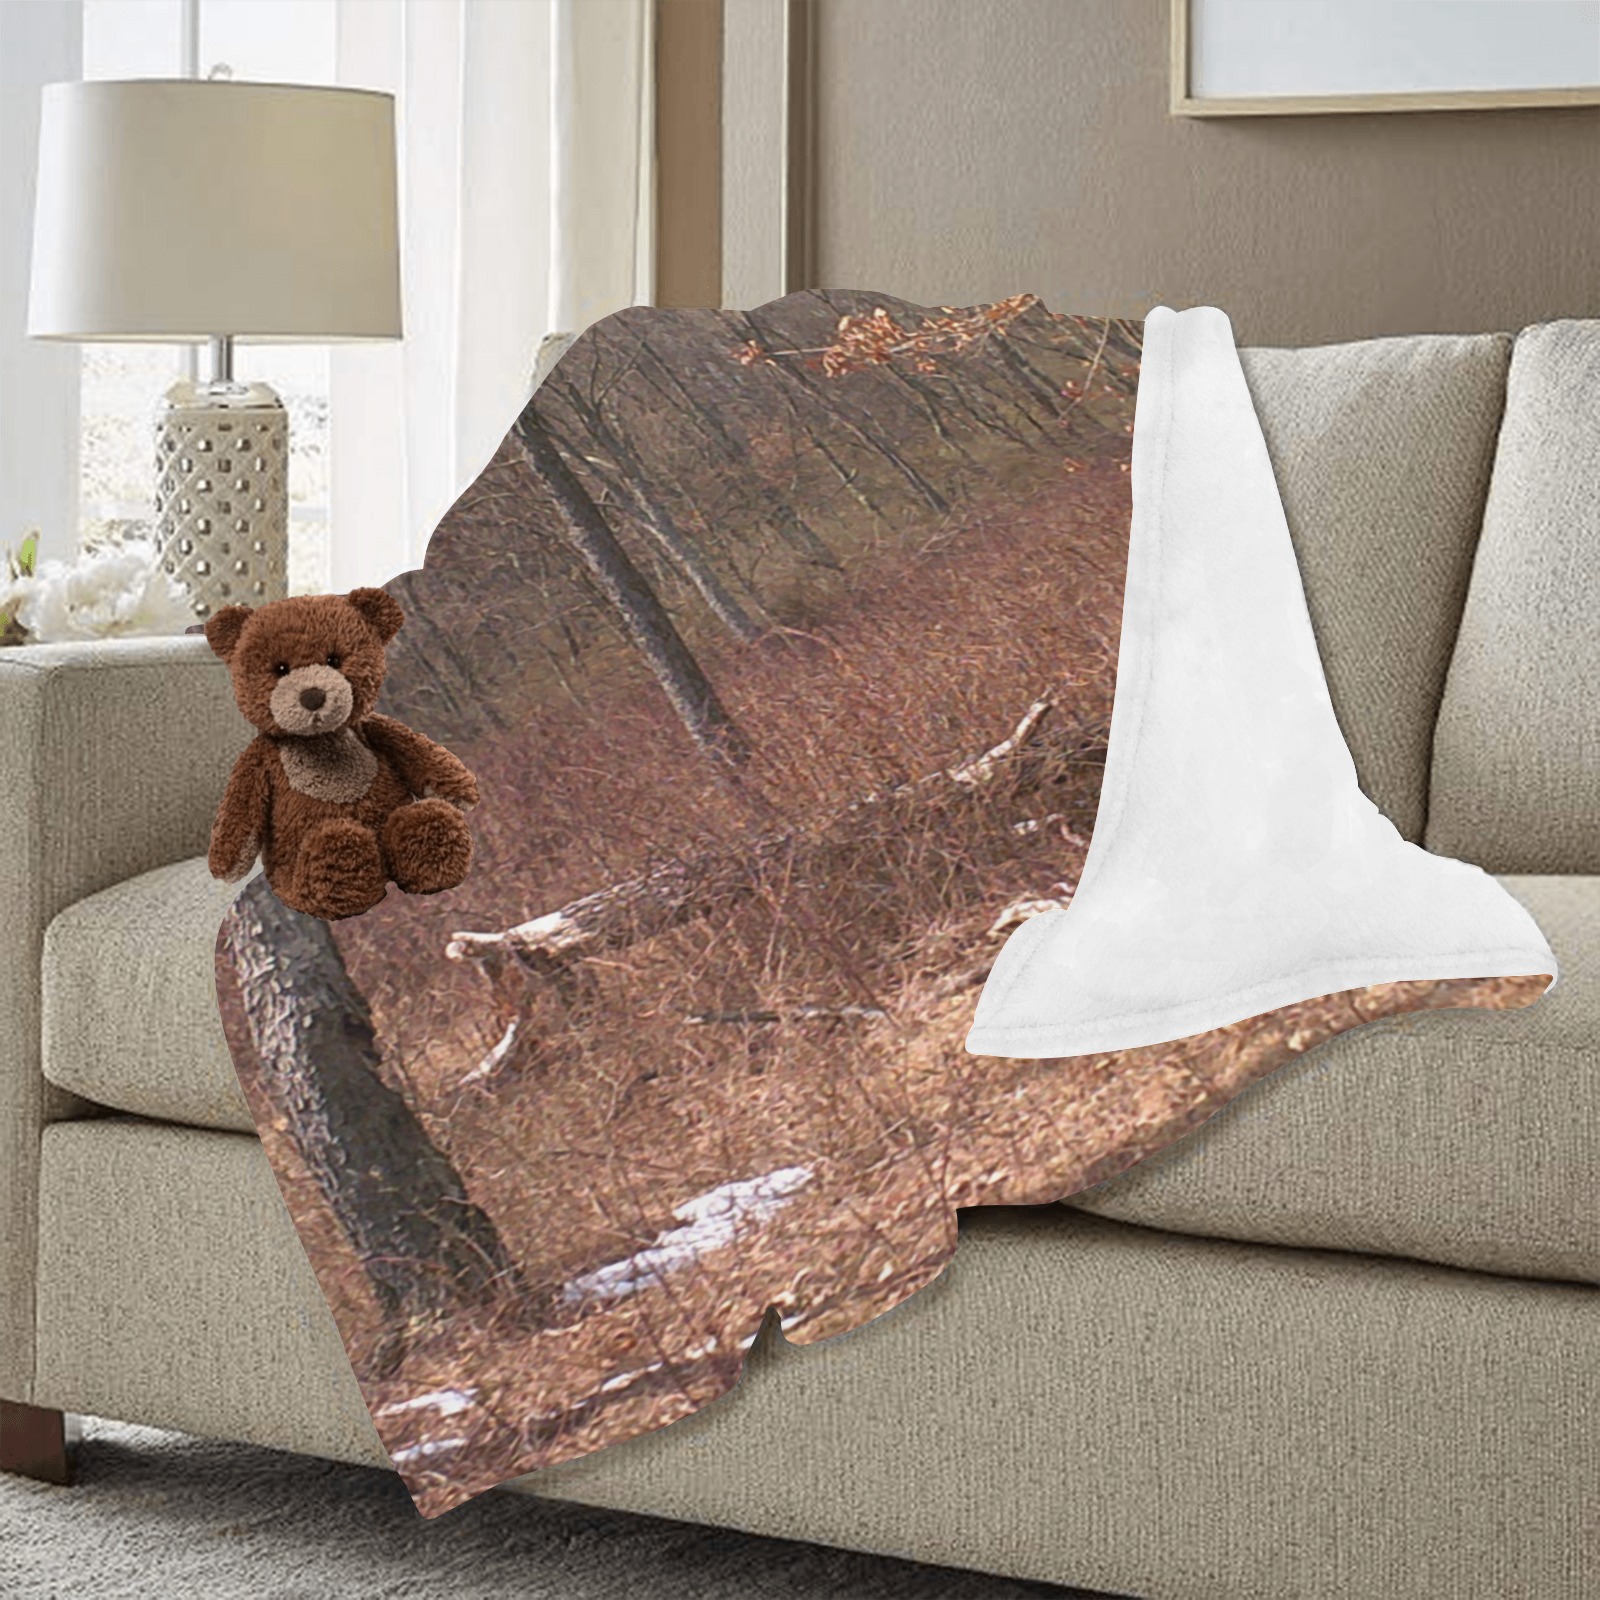 Falling tree in the woods Ultra-Soft Micro Fleece Blanket 40"x50" (Thick)